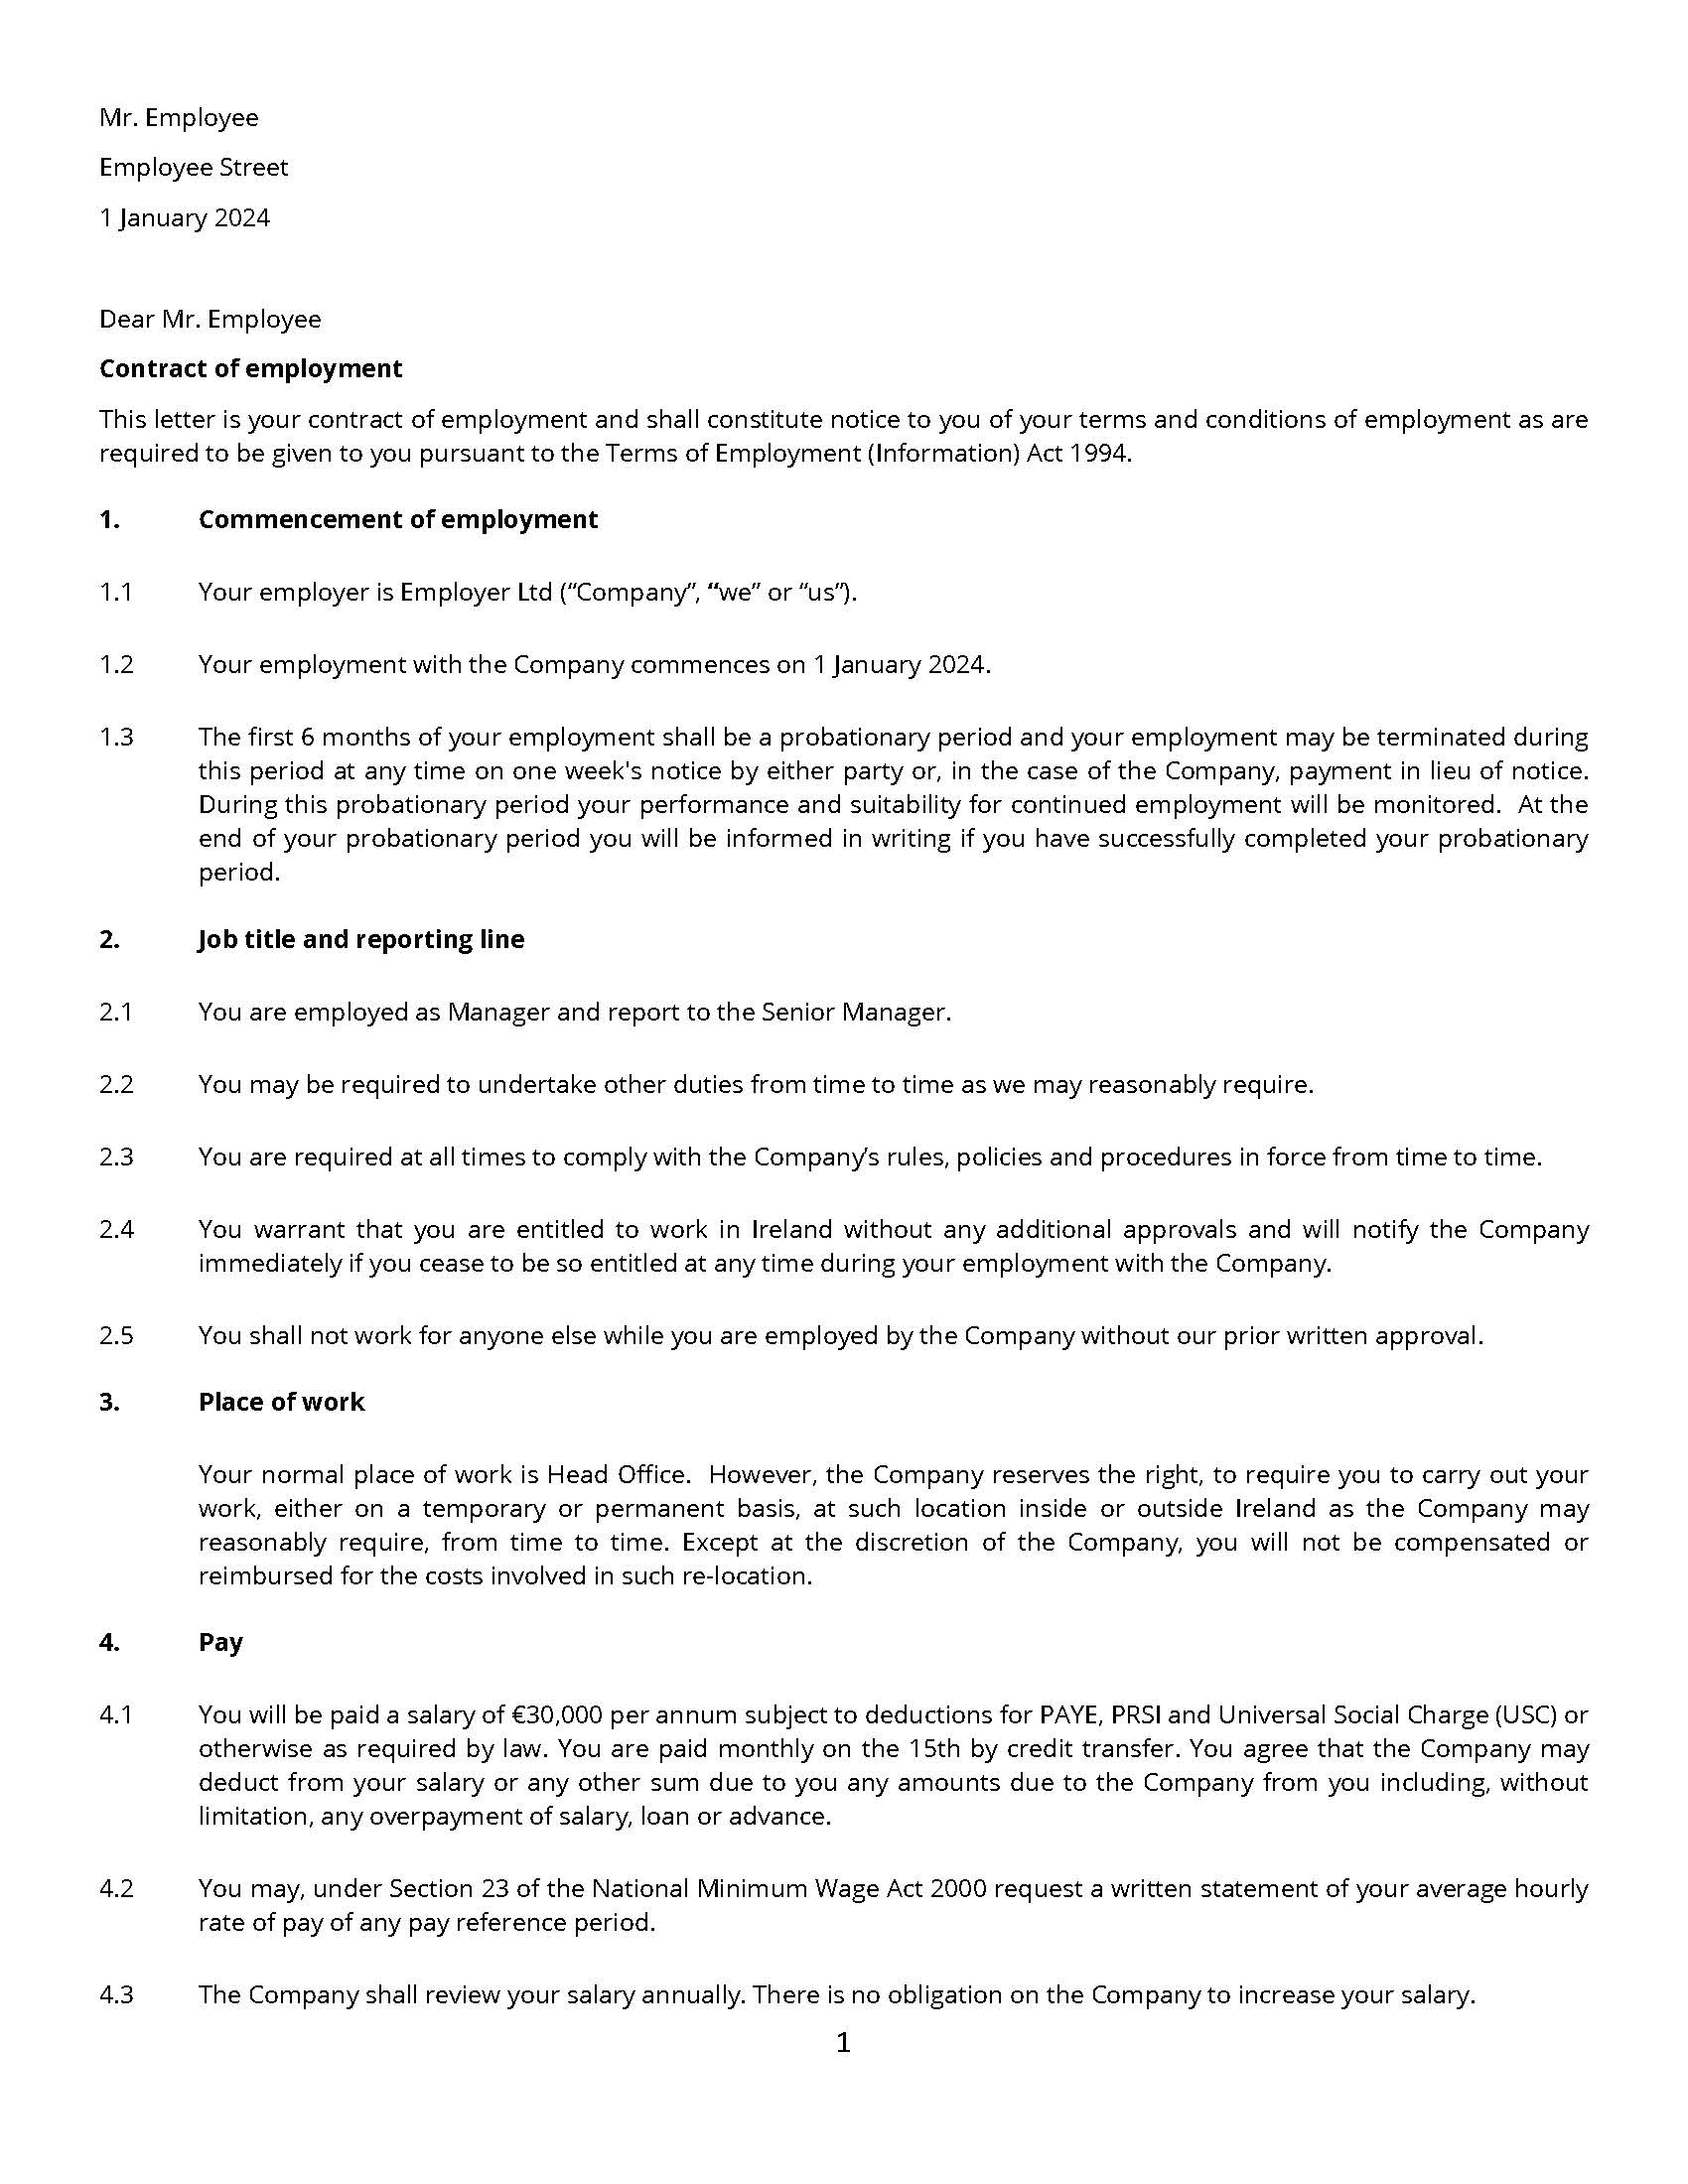 Employment Contract - Sample